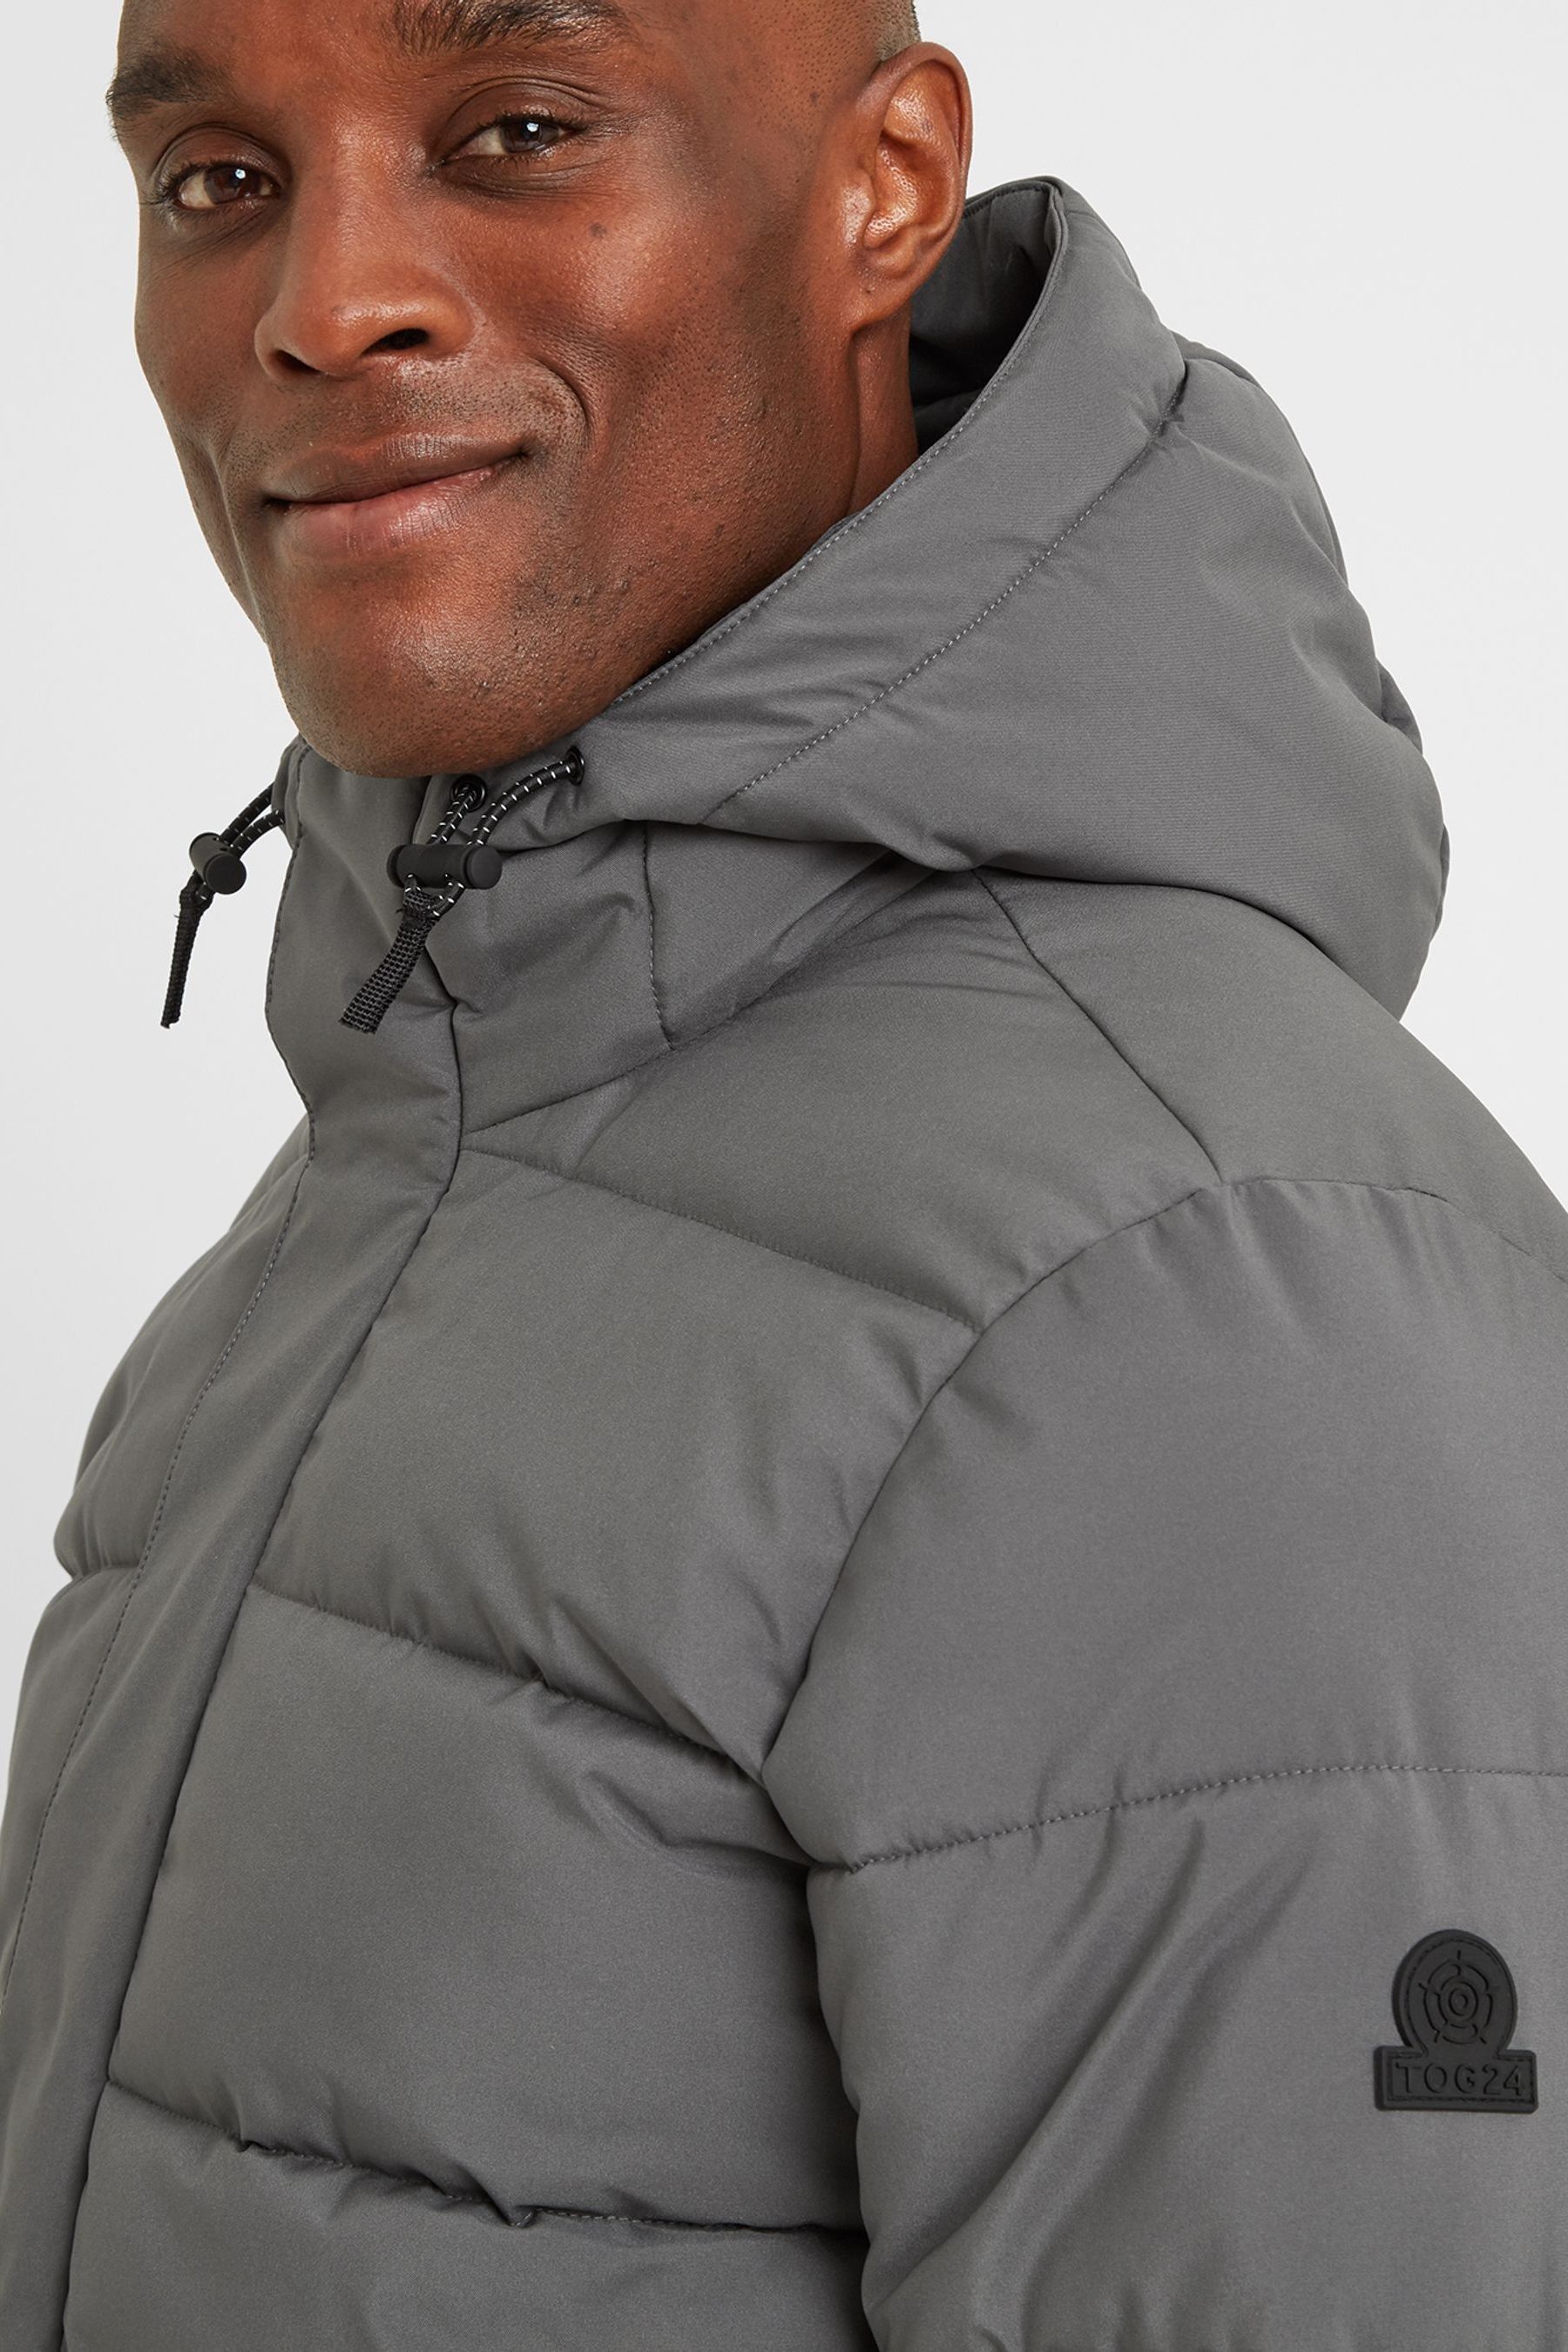 Buy Tog 24 Askham Insulated Jacket from the Next UK online shop